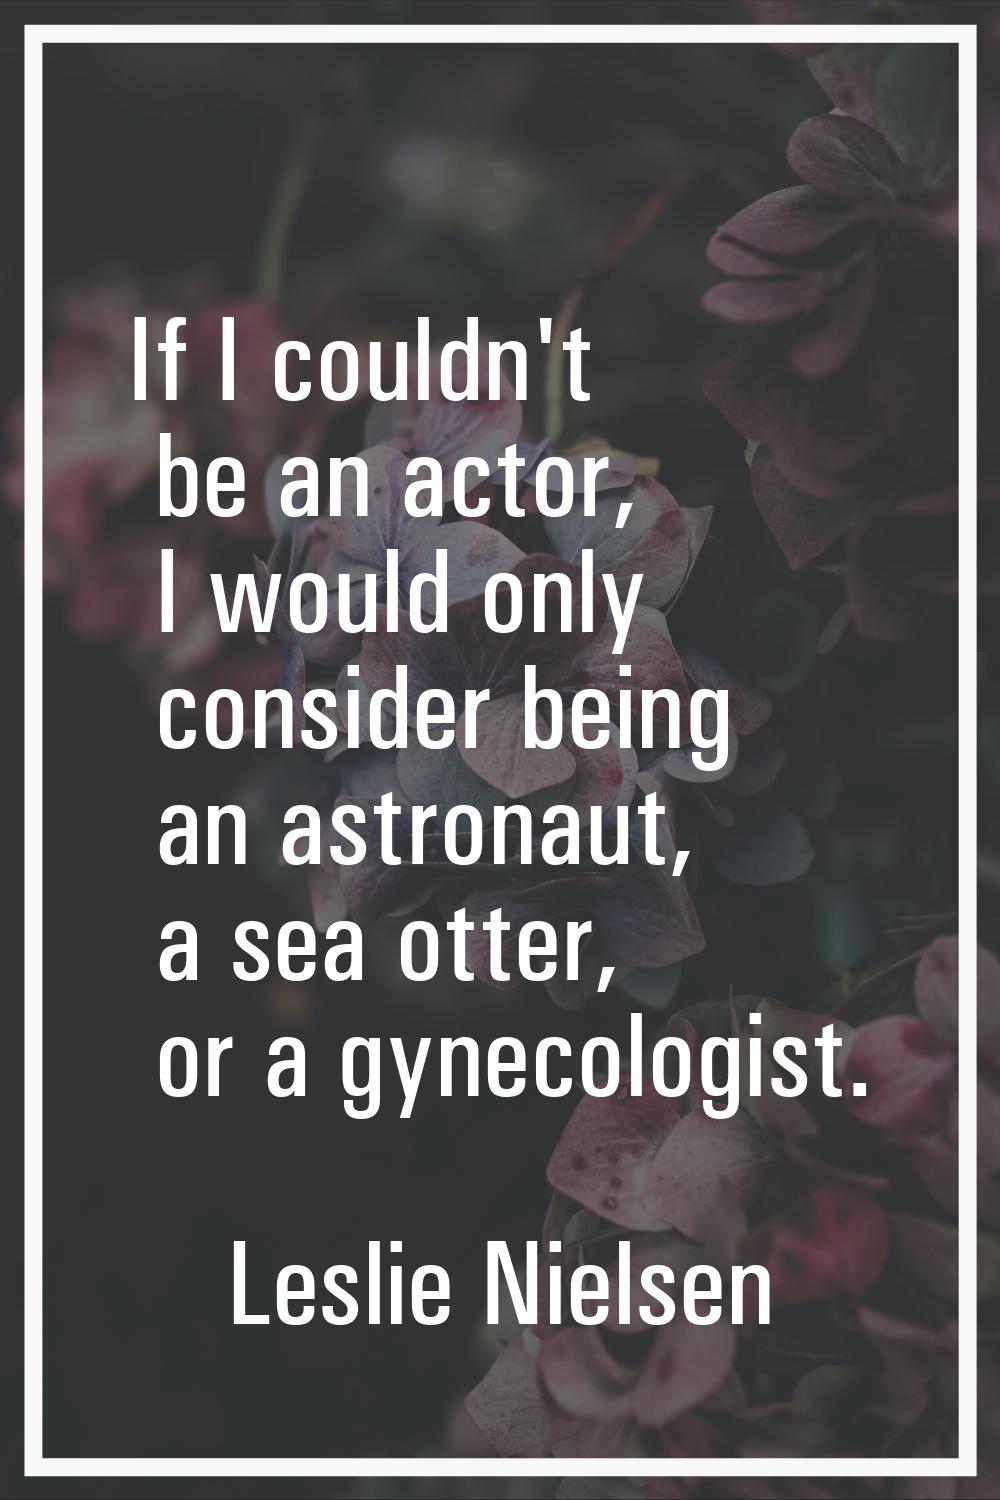 If I couldn't be an actor, I would only consider being an astronaut, a sea otter, or a gynecologist